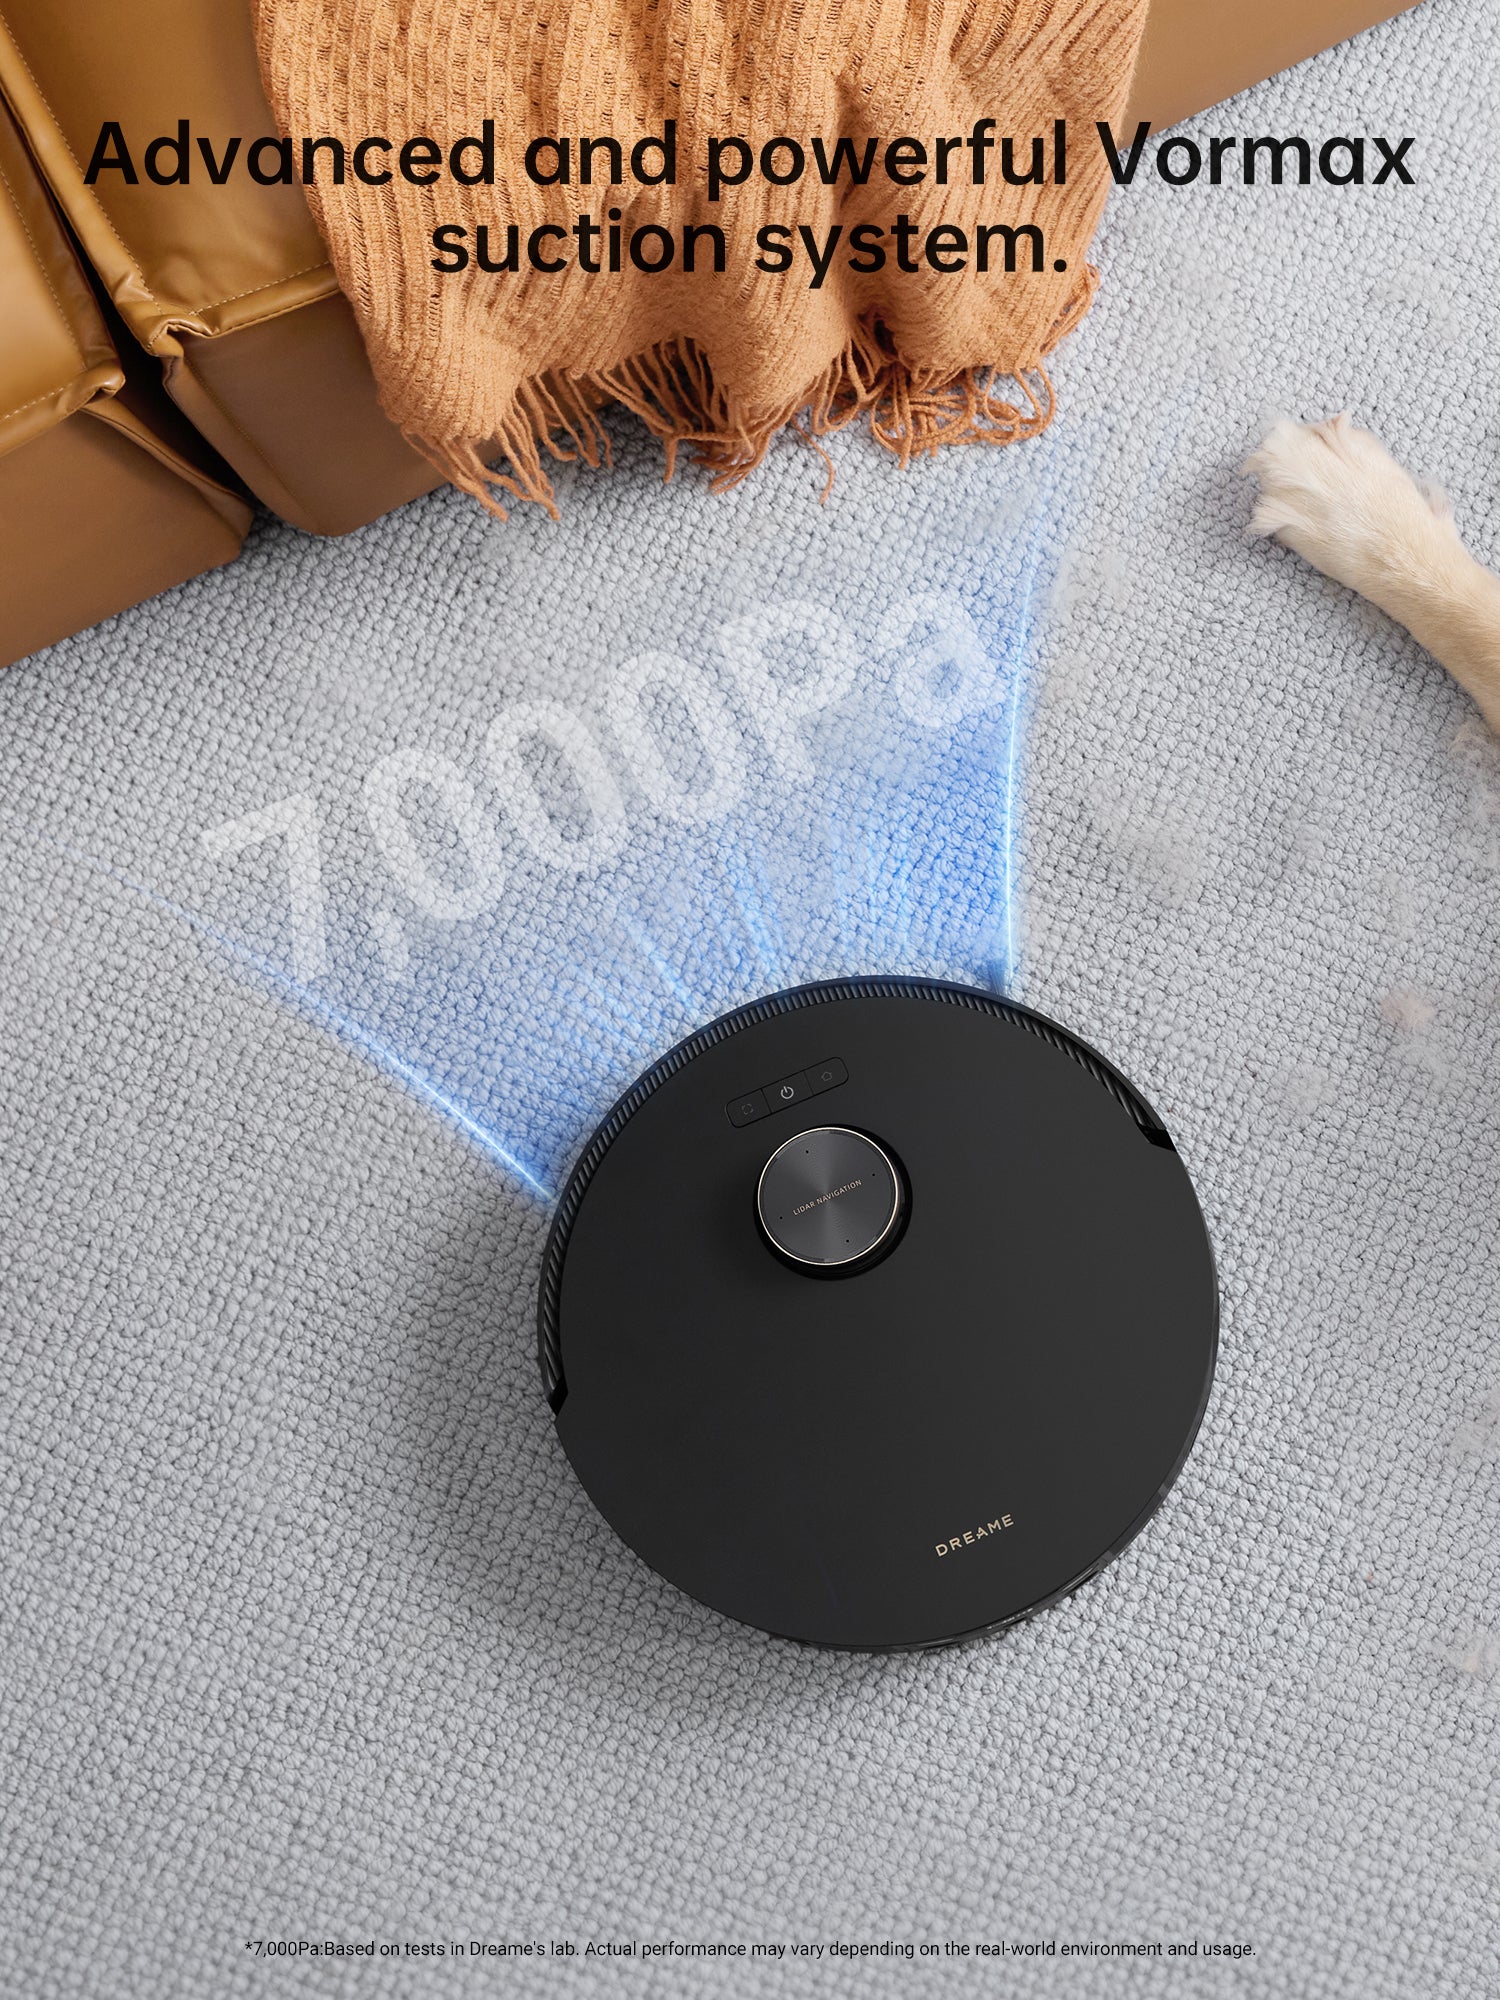 Dreame L20 Ultra Robot Vacuum Cleaner